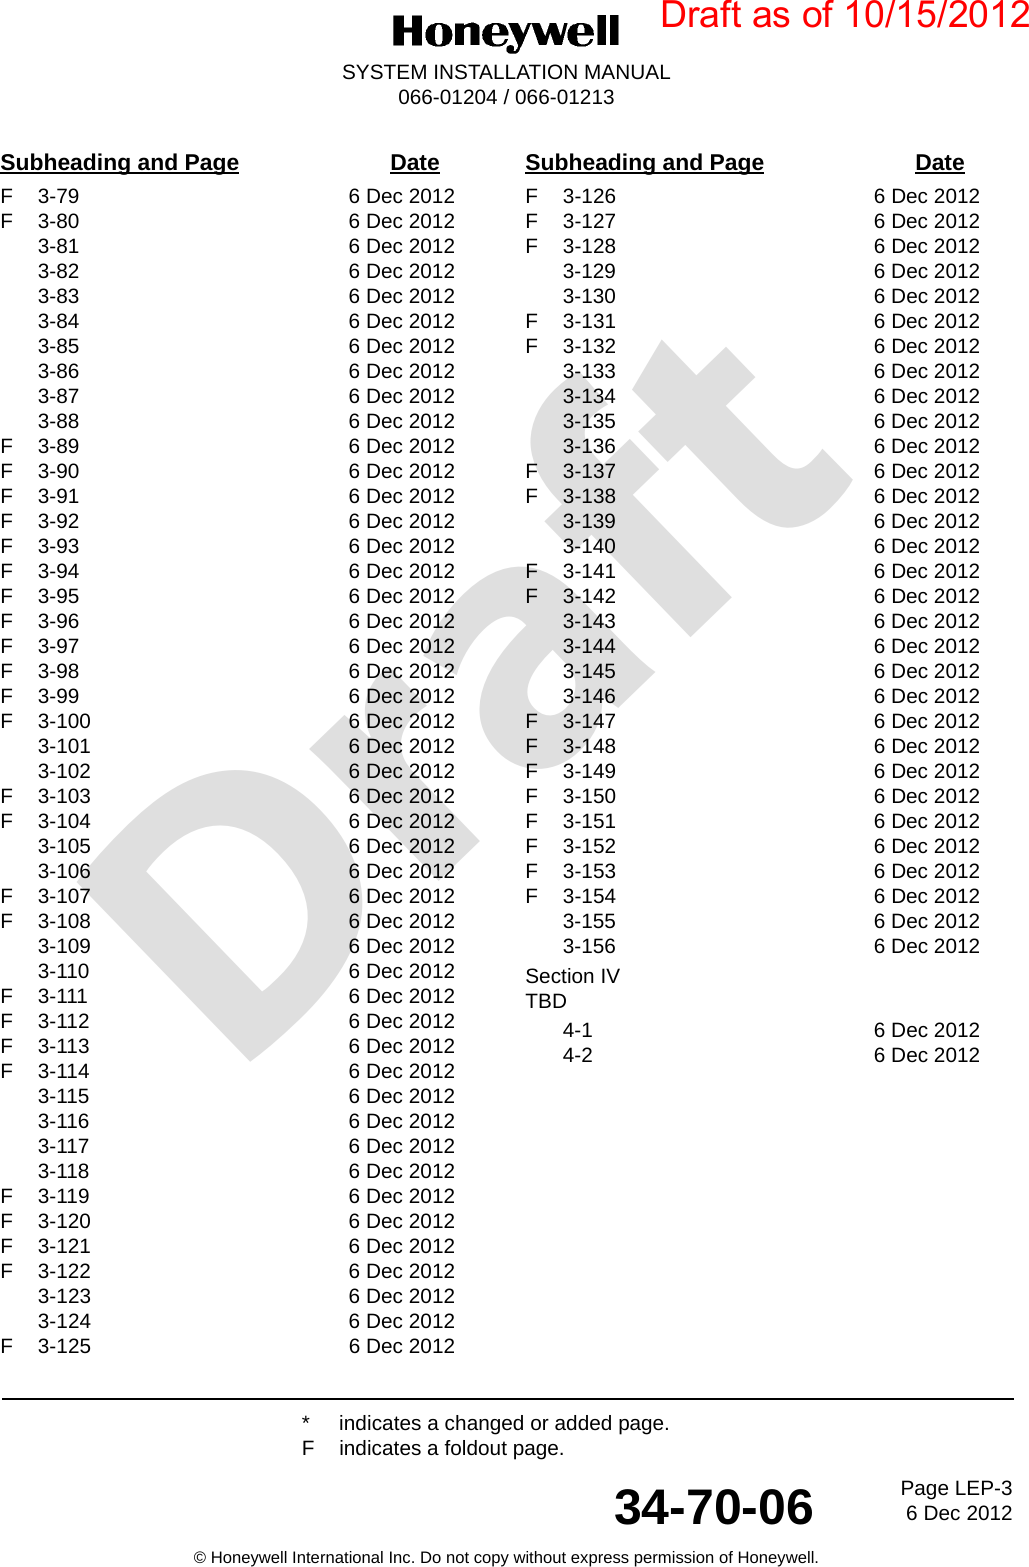 DraftPage LEP-36 Dec 201234-70-06SYSTEM INSTALLATION MANUAL066-01204 / 066-01213© Honeywell International Inc. Do not copy without express permission of Honeywell.Subheading and Page Date Subheading and Page Date* indicates a changed or added page.F indicates a foldout page.F 3-79 6 Dec 2012F 3-80 6 Dec 20123-81 6 Dec 20123-82 6 Dec 20123-83 6 Dec 20123-84 6 Dec 20123-85 6 Dec 20123-86 6 Dec 20123-87 6 Dec 20123-88 6 Dec 2012F 3-89 6 Dec 2012F 3-90 6 Dec 2012F 3-91 6 Dec 2012F 3-92 6 Dec 2012F 3-93 6 Dec 2012F 3-94 6 Dec 2012F 3-95 6 Dec 2012F 3-96 6 Dec 2012F 3-97 6 Dec 2012F 3-98 6 Dec 2012F 3-99 6 Dec 2012F 3-100 6 Dec 20123-101 6 Dec 20123-102 6 Dec 2012F 3-103 6 Dec 2012F 3-104 6 Dec 20123-105 6 Dec 20123-106 6 Dec 2012F 3-107 6 Dec 2012F 3-108 6 Dec 20123-109 6 Dec 20123-110 6 Dec 2012F 3-111 6 Dec 2012F 3-112 6 Dec 2012F 3-113 6 Dec 2012F 3-114 6 Dec 20123-115 6 Dec 20123-116 6 Dec 20123-117 6 Dec 20123-118 6 Dec 2012F 3-119 6 Dec 2012F 3-120 6 Dec 2012F 3-121 6 Dec 2012F 3-122 6 Dec 20123-123 6 Dec 20123-124 6 Dec 2012F 3-125 6 Dec 2012F 3-126 6 Dec 2012F 3-127 6 Dec 2012F 3-128 6 Dec 20123-129 6 Dec 20123-130 6 Dec 2012F 3-131 6 Dec 2012F 3-132 6 Dec 20123-133 6 Dec 20123-134 6 Dec 20123-135 6 Dec 20123-136 6 Dec 2012F 3-137 6 Dec 2012F 3-138 6 Dec 20123-139 6 Dec 20123-140 6 Dec 2012F 3-141 6 Dec 2012F 3-142 6 Dec 20123-143 6 Dec 20123-144 6 Dec 20123-145 6 Dec 20123-146 6 Dec 2012F 3-147 6 Dec 2012F 3-148 6 Dec 2012F 3-149 6 Dec 2012F 3-150 6 Dec 2012F 3-151 6 Dec 2012F 3-152 6 Dec 2012F 3-153 6 Dec 2012F 3-154 6 Dec 20123-155 6 Dec 20123-156 6 Dec 2012Section IVTBD4-1 6 Dec 20124-2 6 Dec 2012Draft as of 10/15/2012